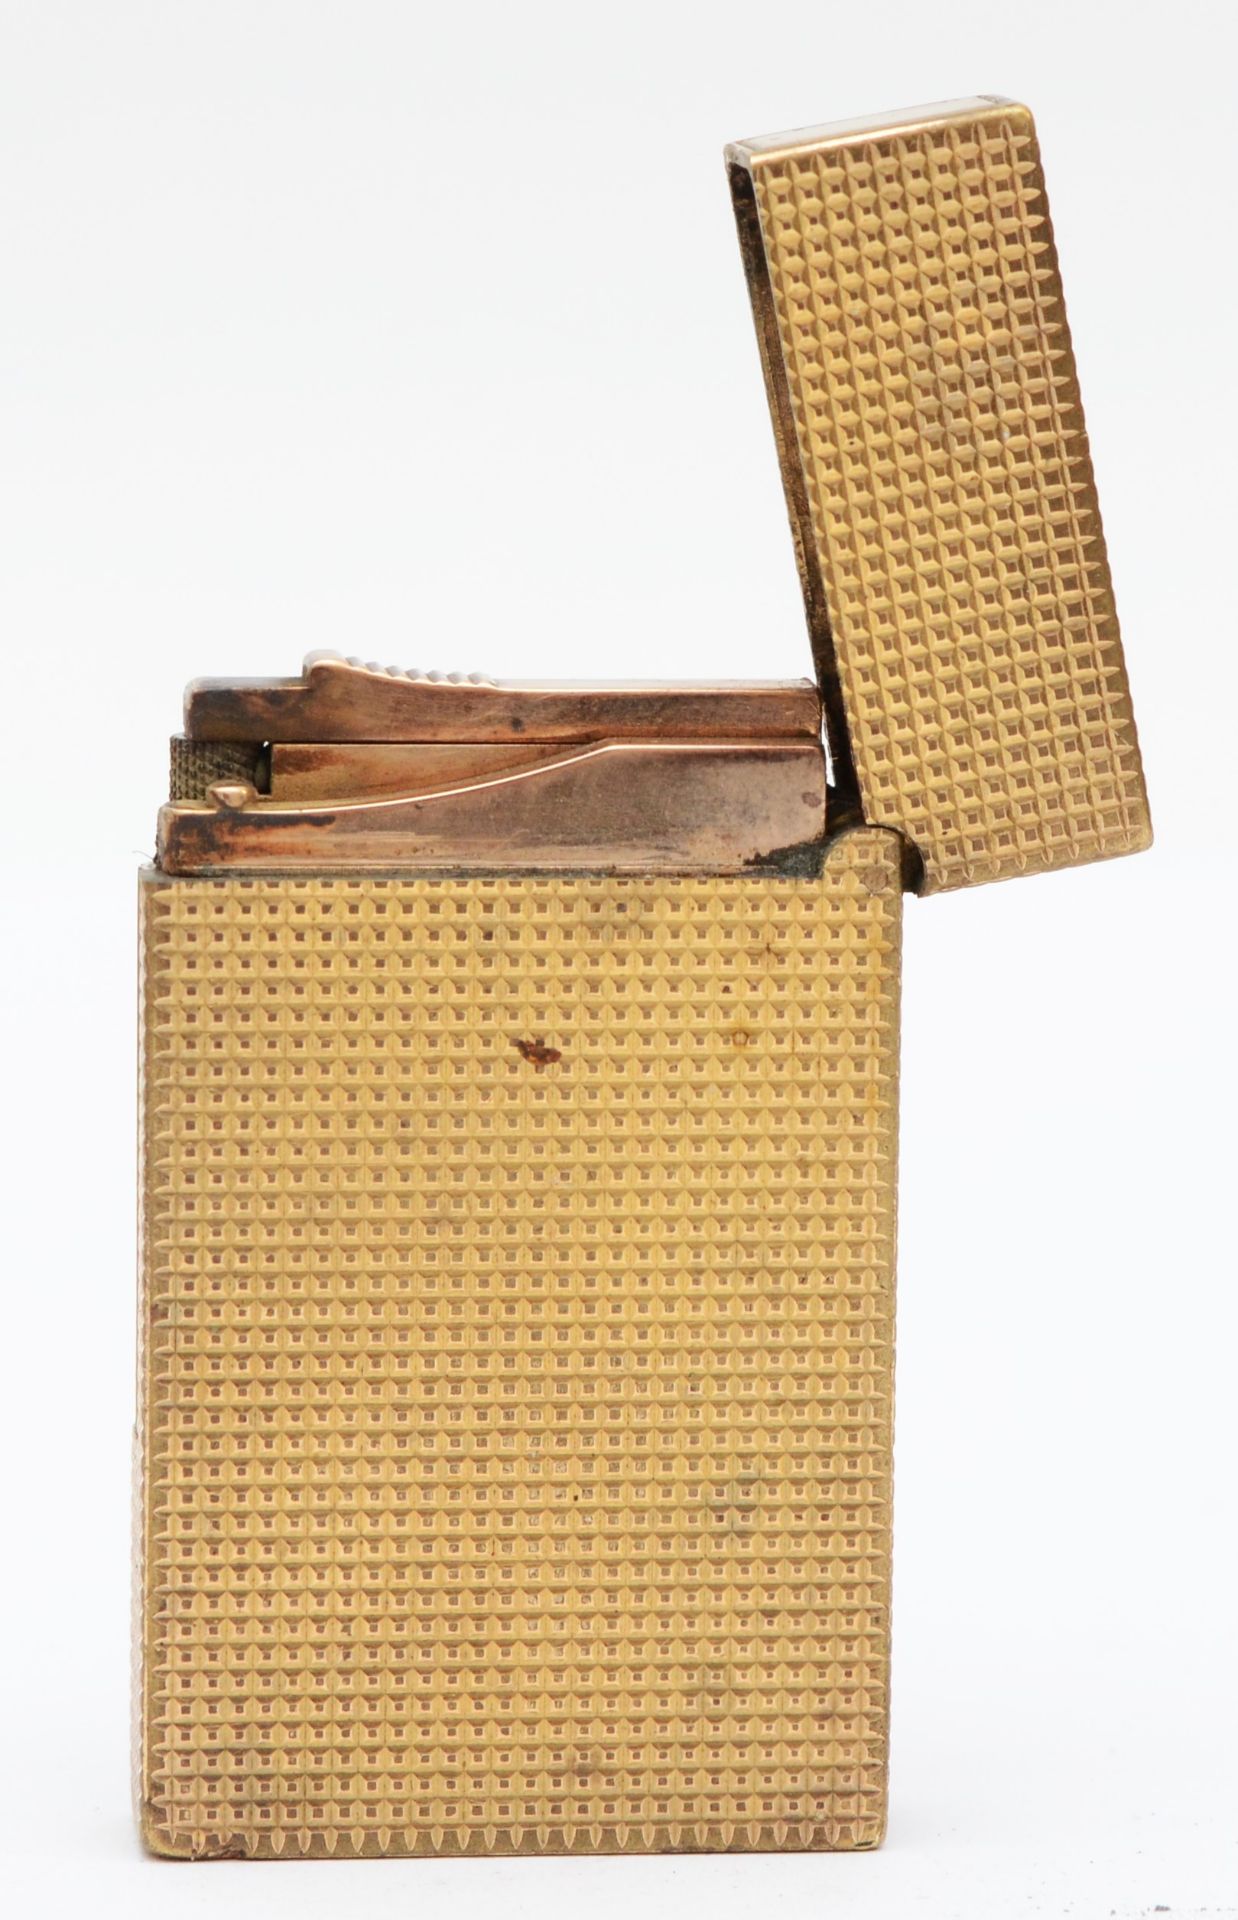 S.T. Dupont, a gold plated gas lighter, serial number 81DFK68. - Image 2 of 3